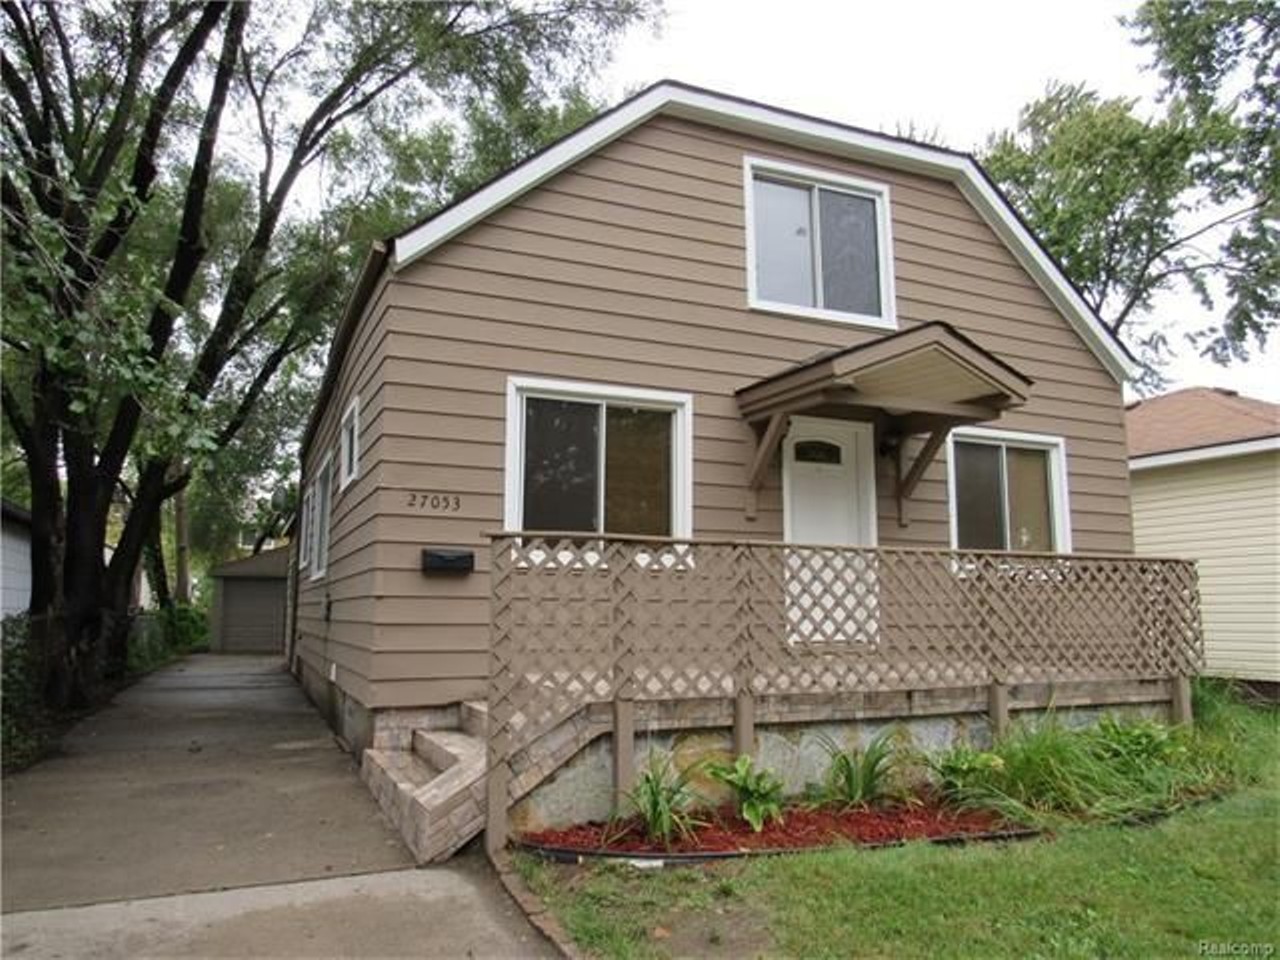 27053 Brettonwoods St, Madison Heights 
$149,000
3 beds, 2 baths, 1,552 sq ft